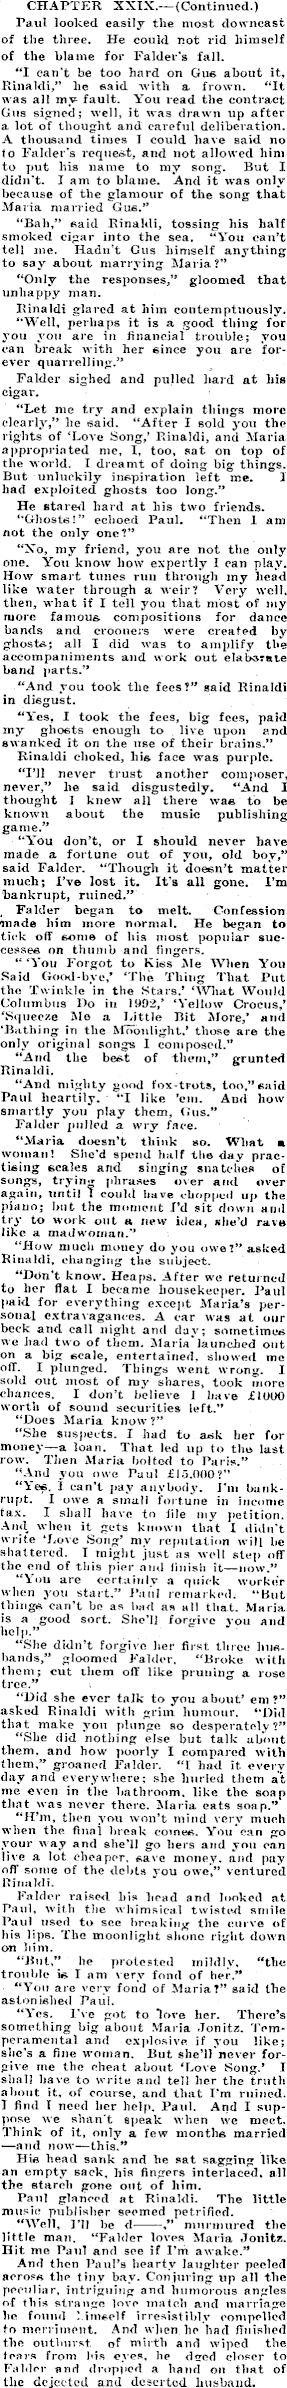 Papers Past Newspapers Star Christchurch 24 October 1933 Love Song